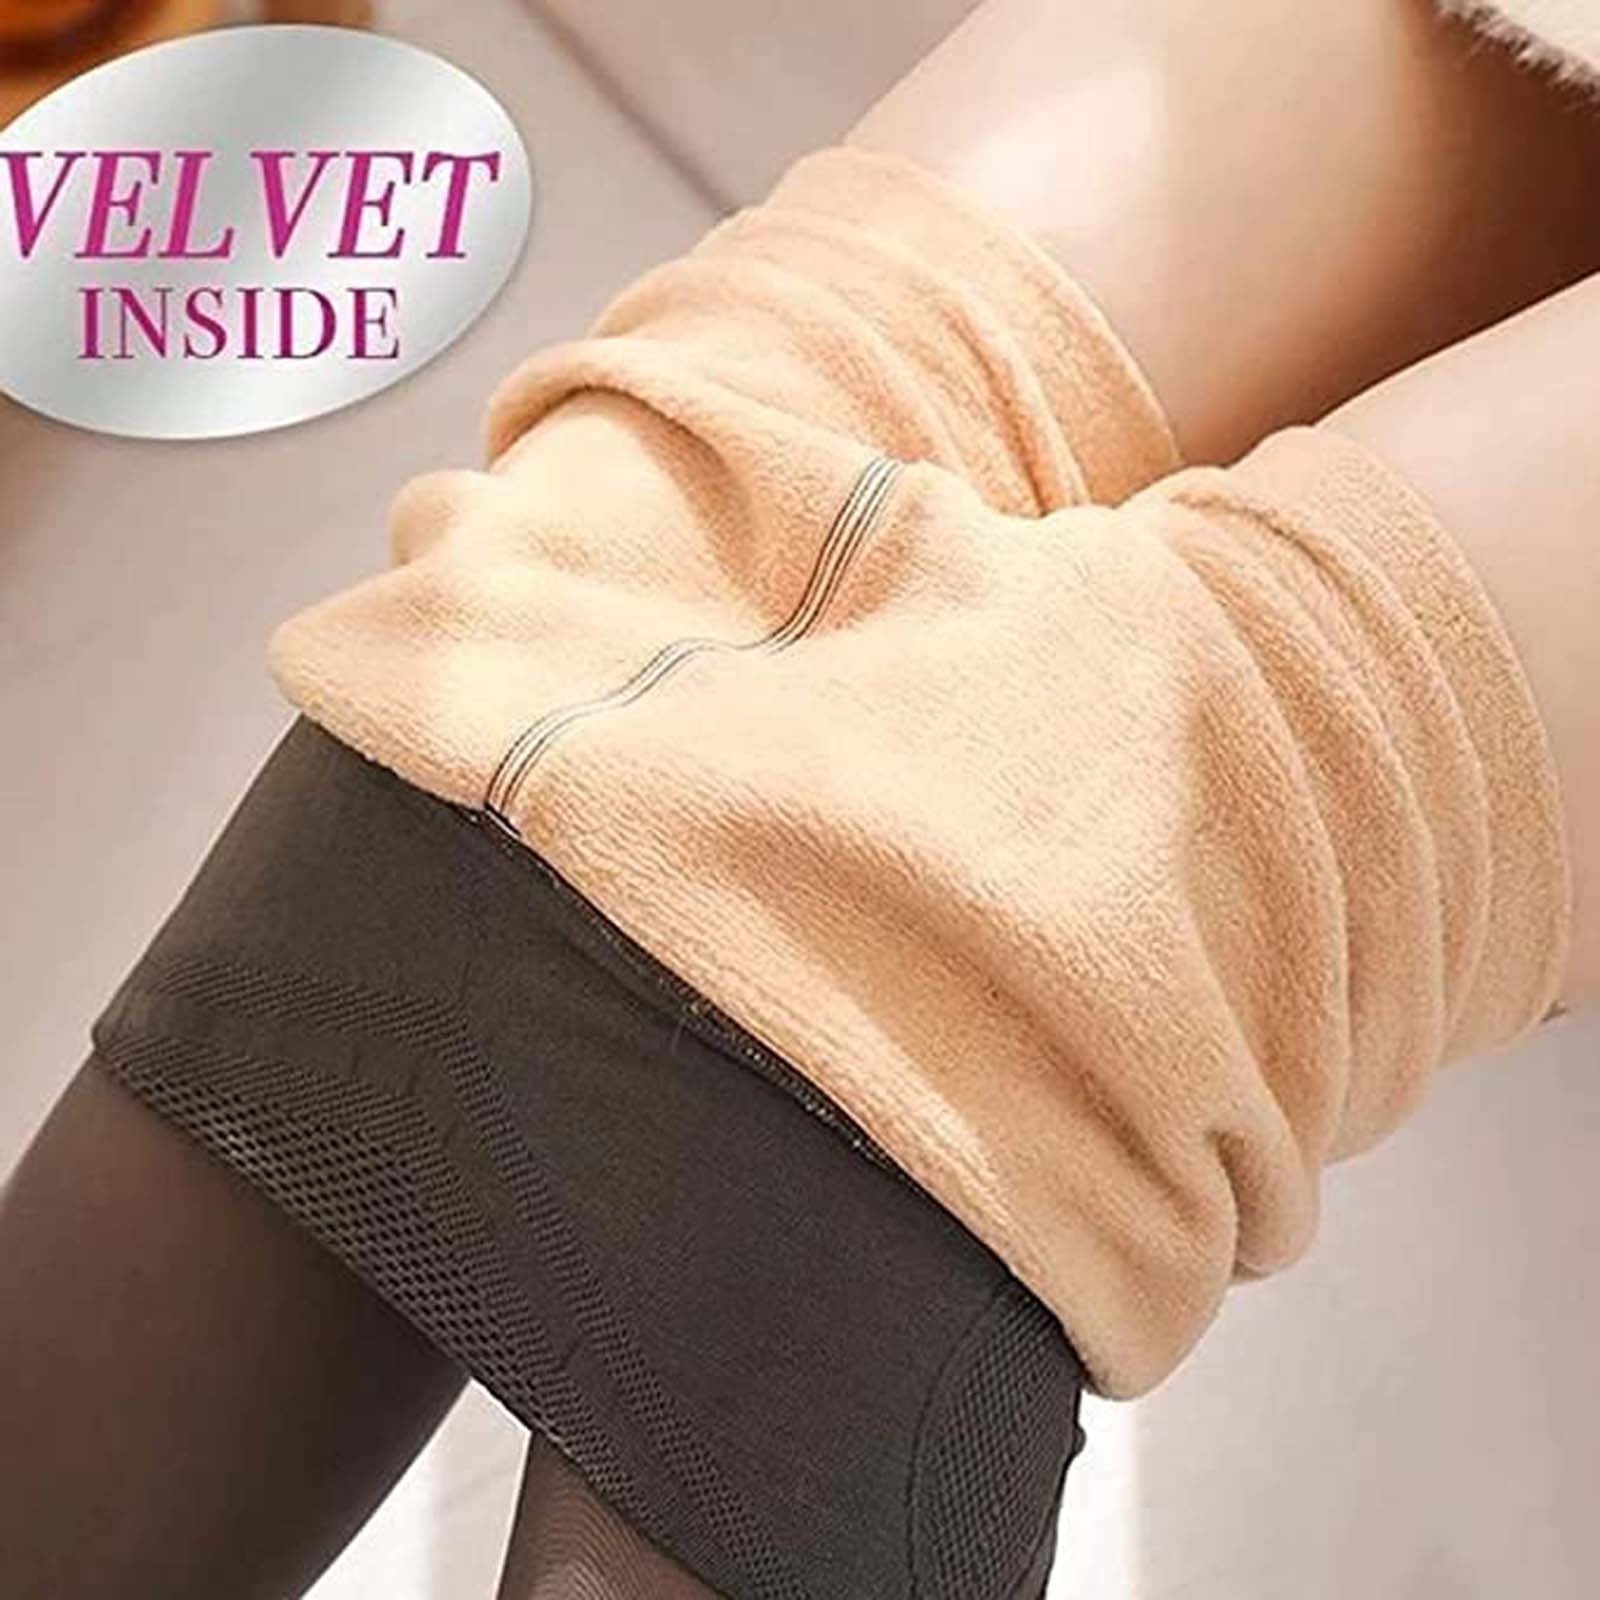 Sersu Thick Winter Socks Tights with Fleece Inside Skin Color